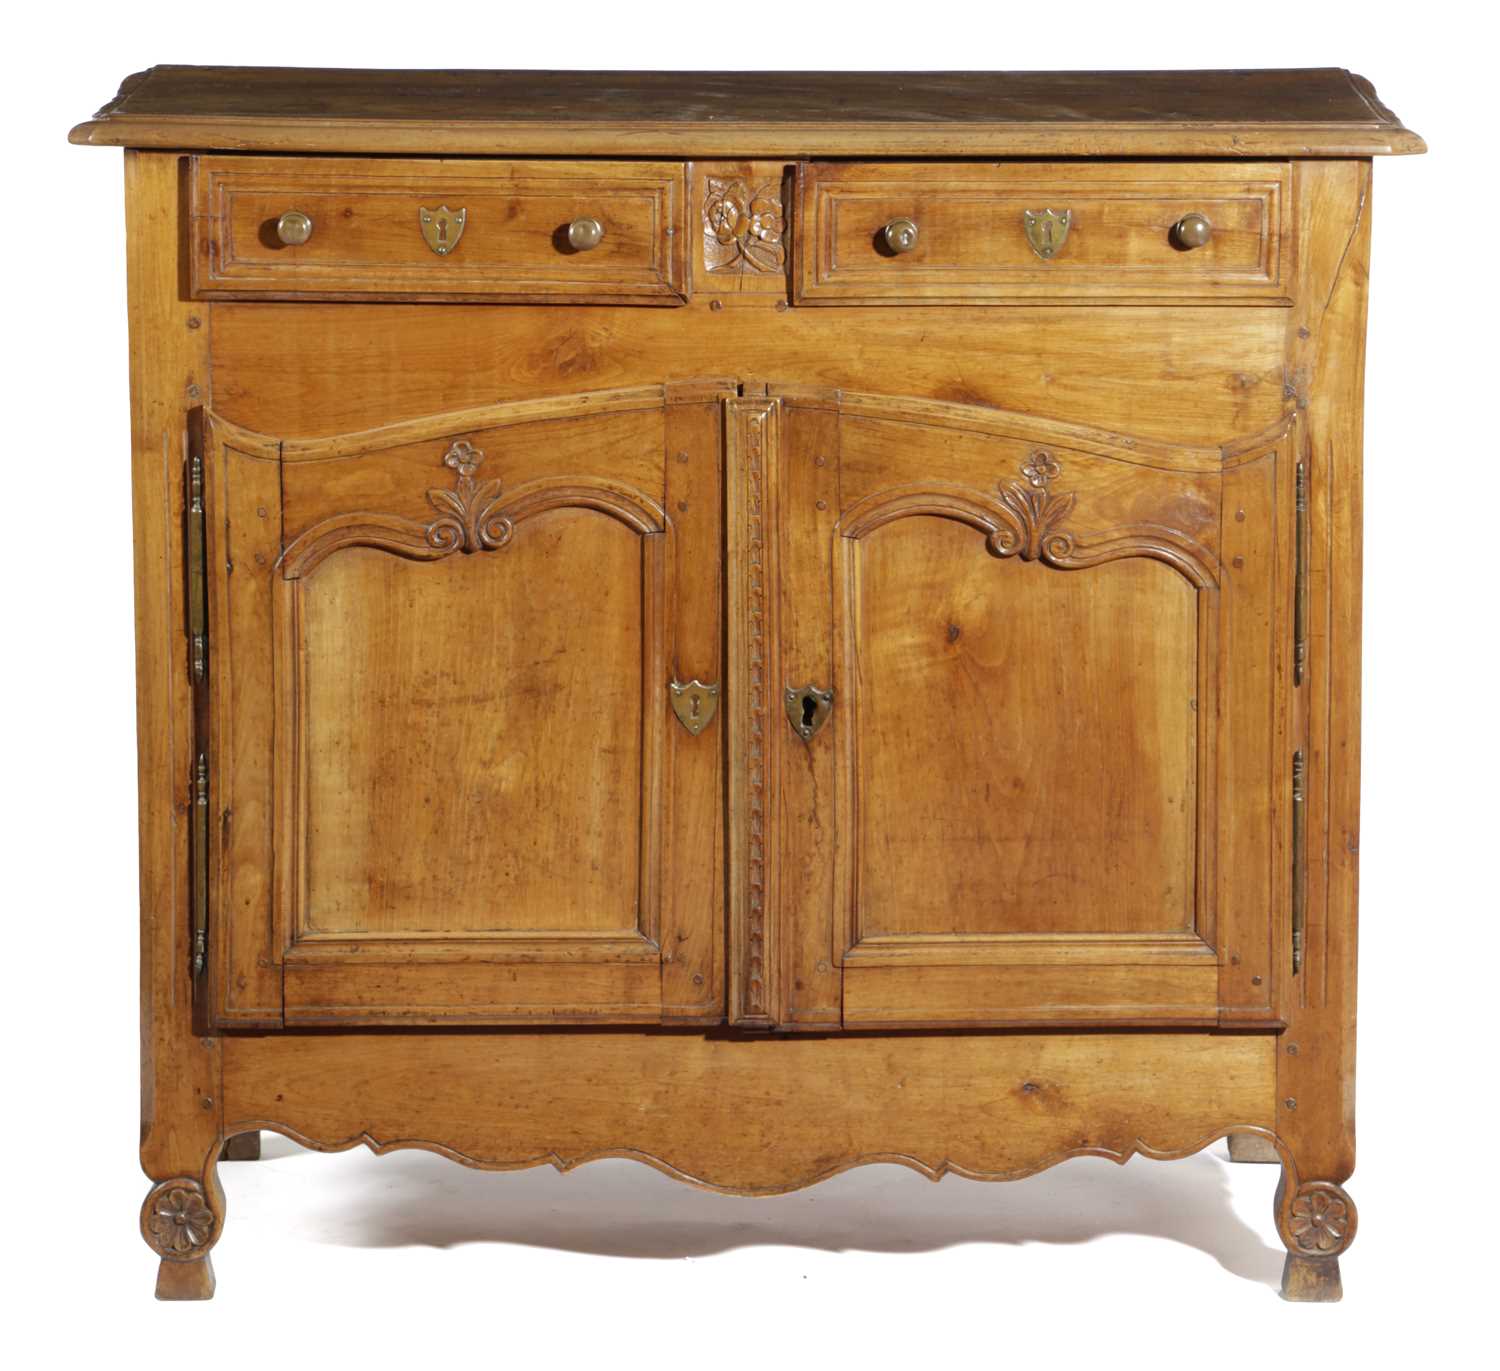 A FRENCH CHERRYWOOD BUFFET LATE 18TH / EARLY 19TH CENTURY carved with leaves and flowers, with a